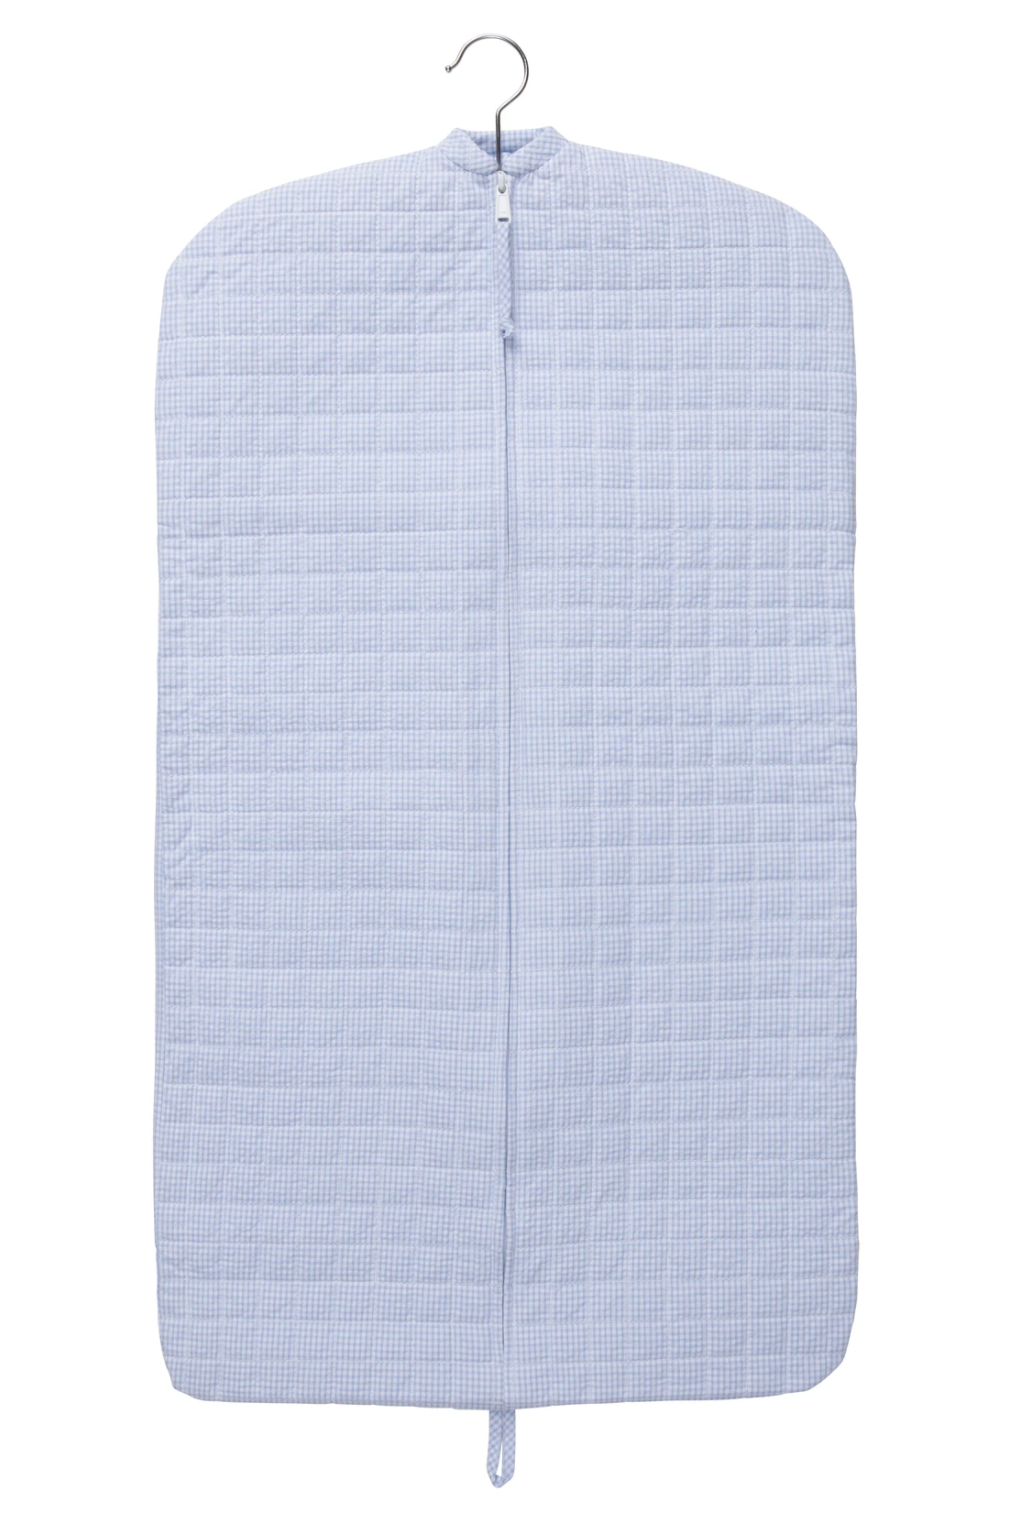 Quilted Luggage Garment Light Blue